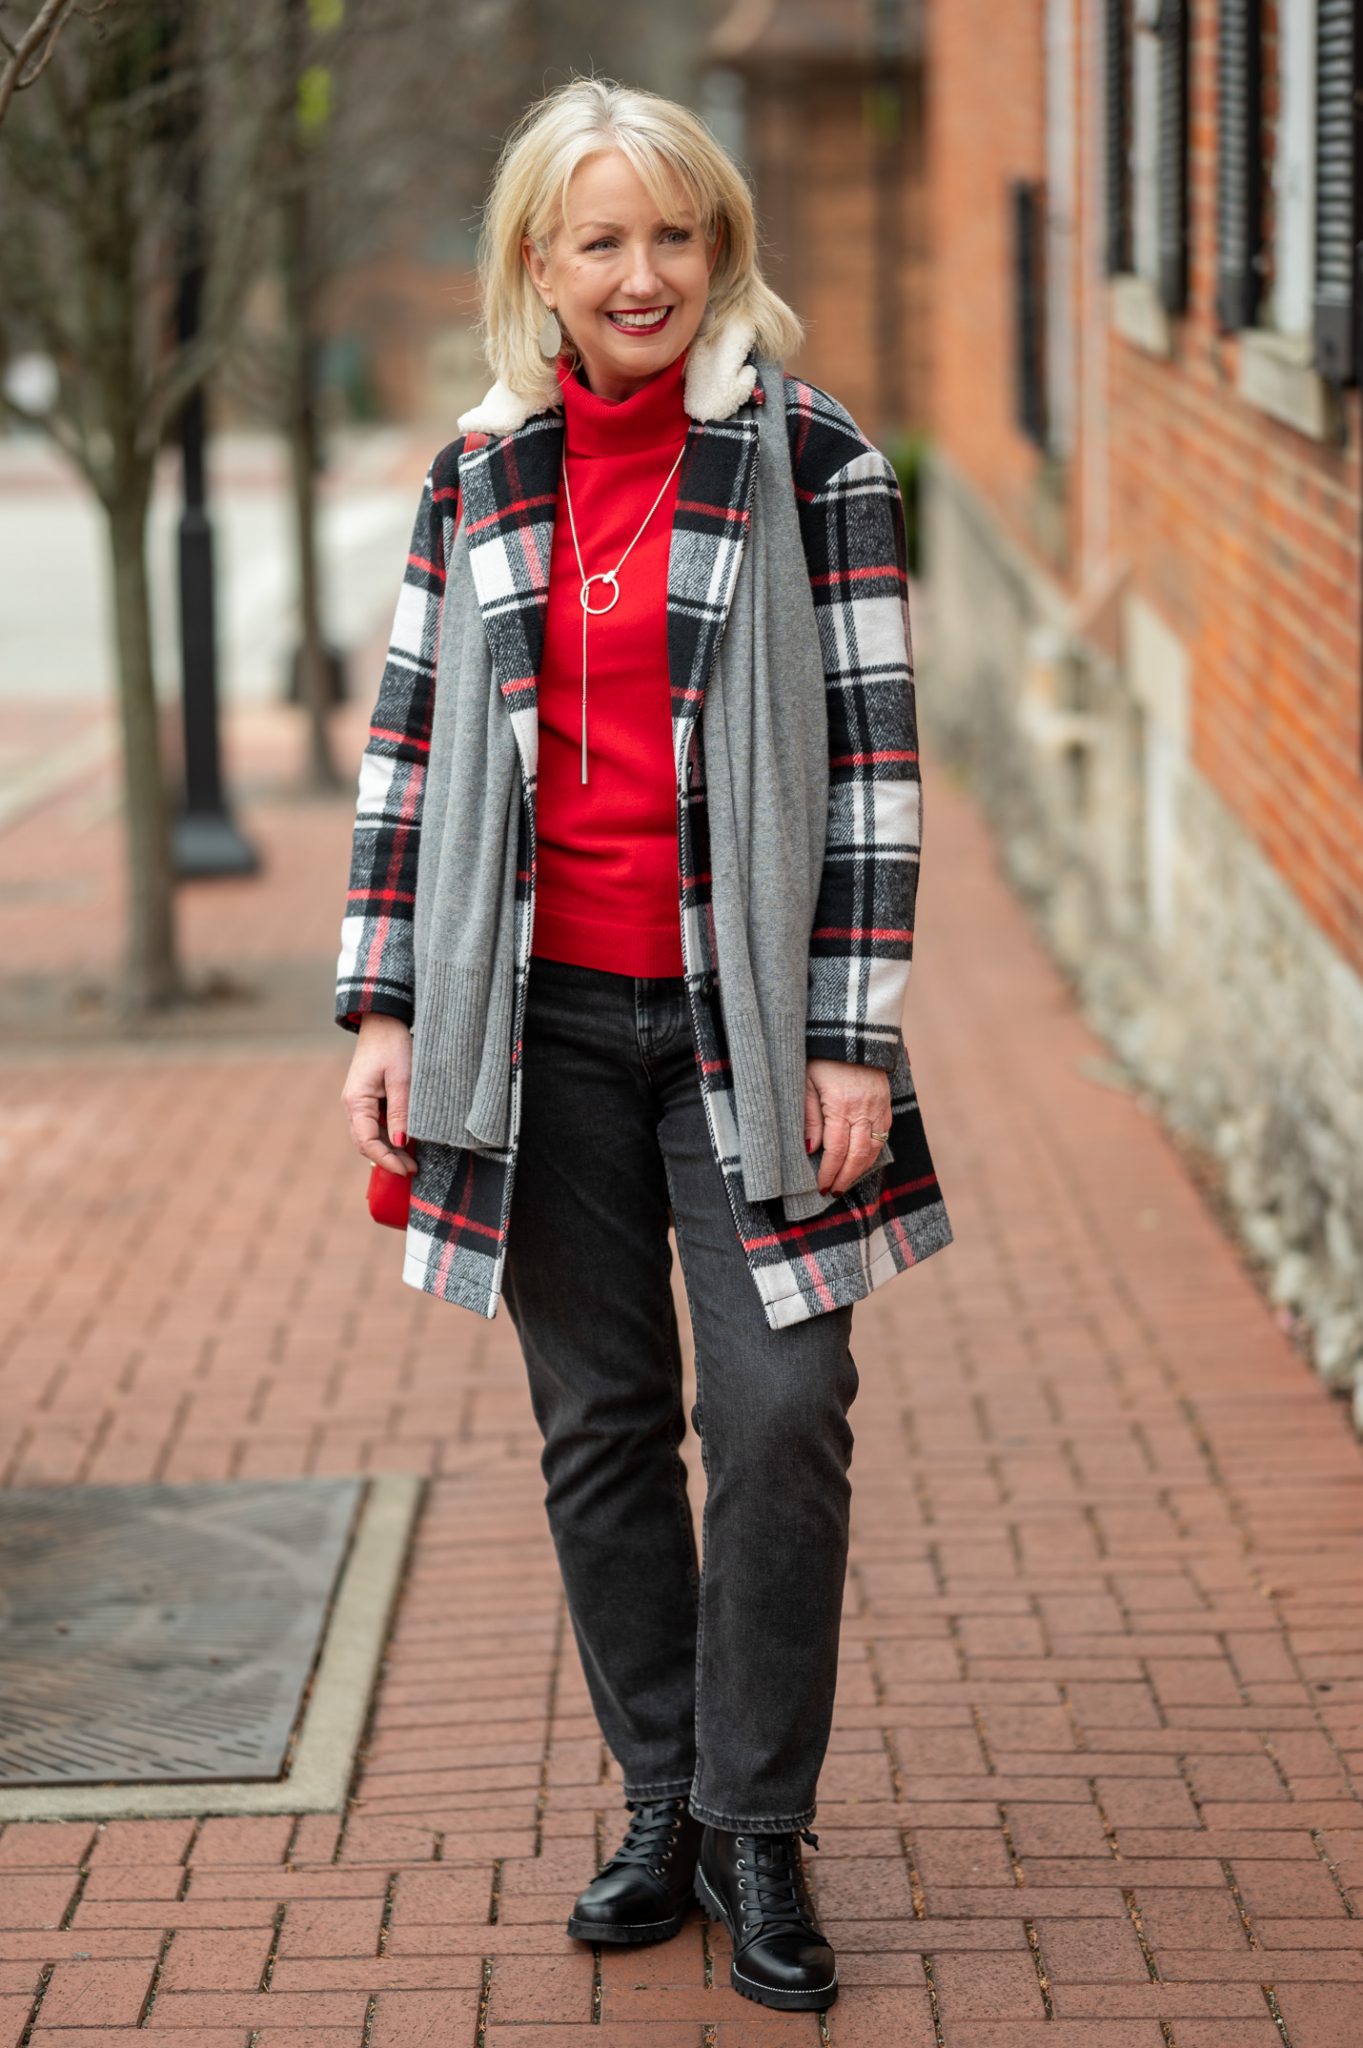 Winter Classics Outfit with Red Accents - Dressed for My Day